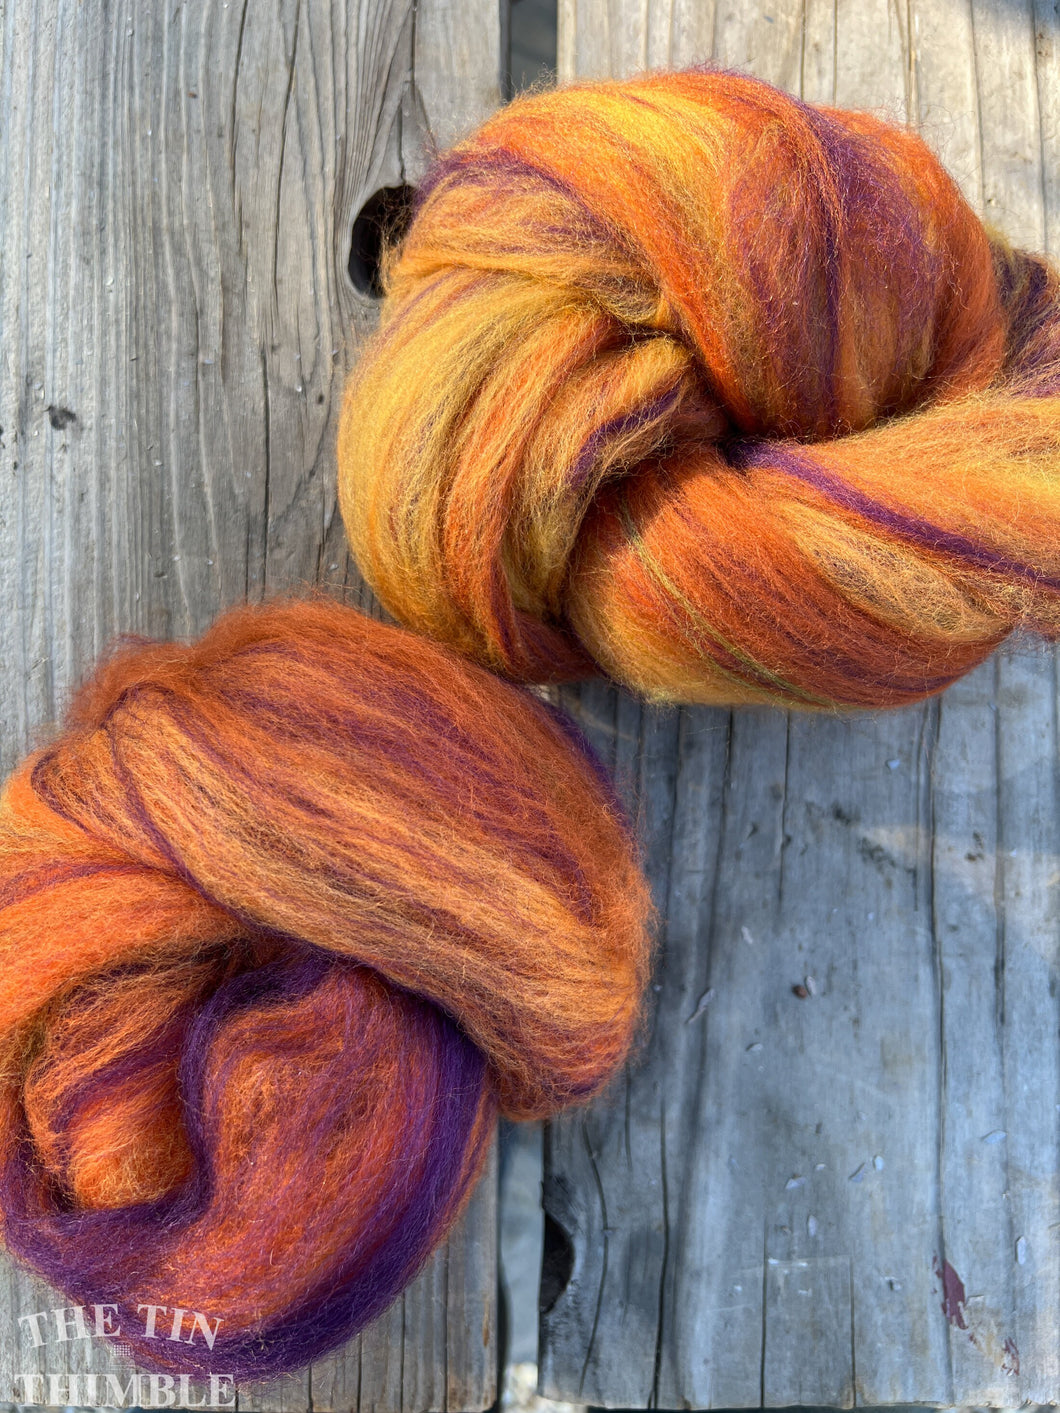 Hand Carded Batt for Felting or Spinning - Merino Blend - Hand Dyed and Commercially Dyed Fibers - Pansy